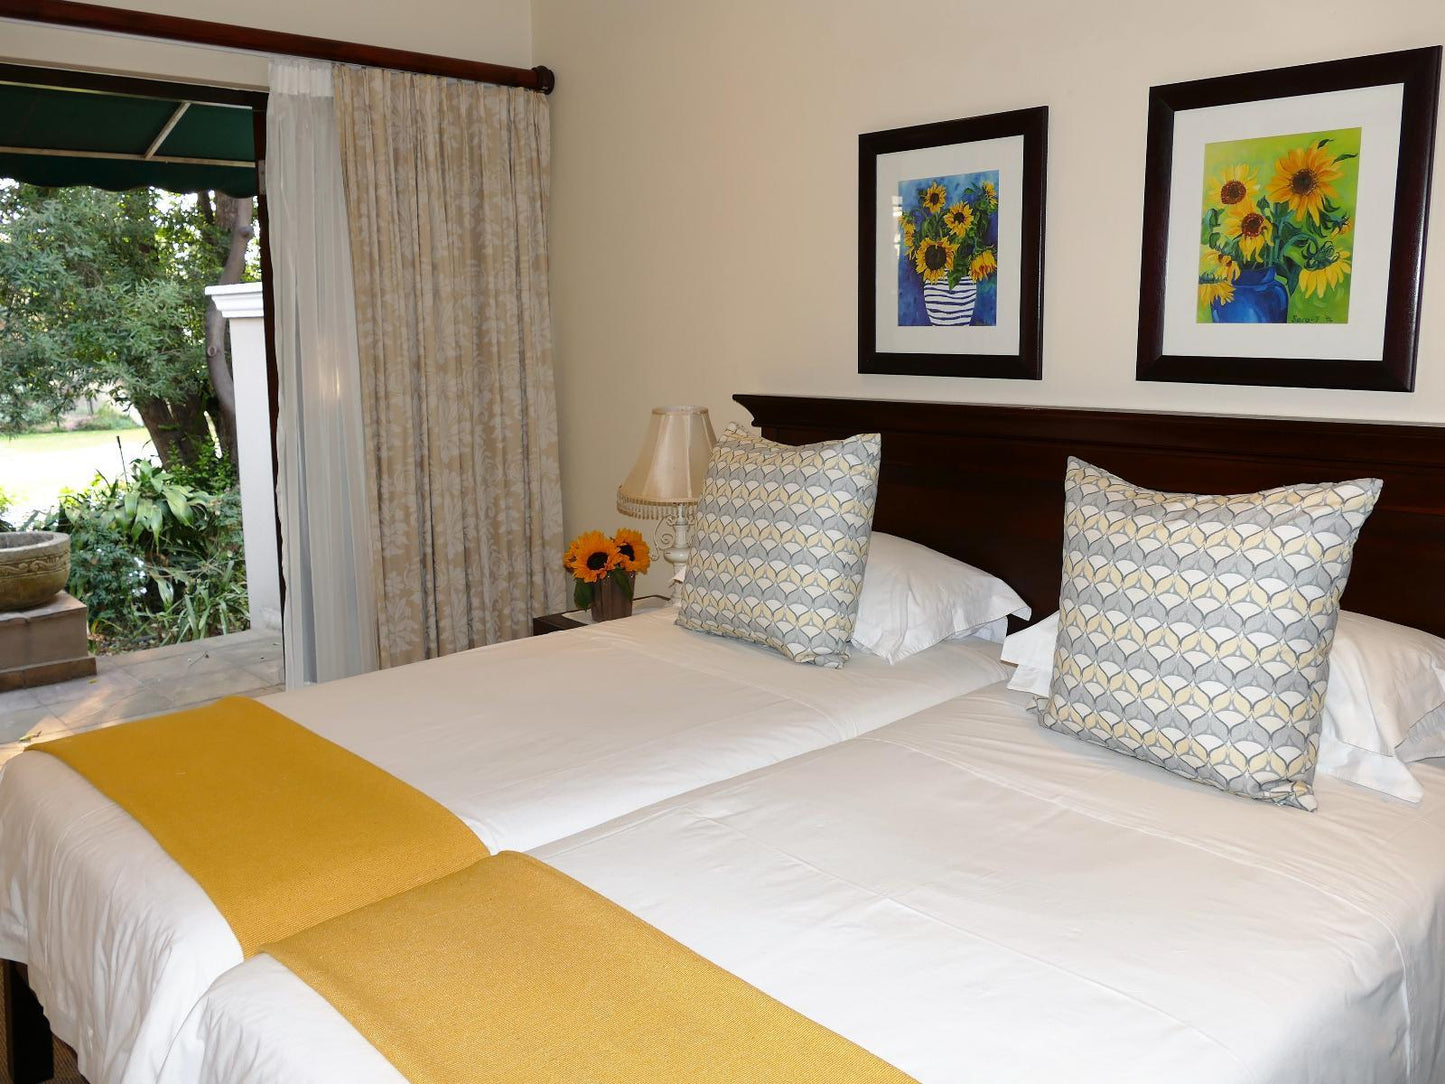 Twin Room @ 174 Premier Guest House